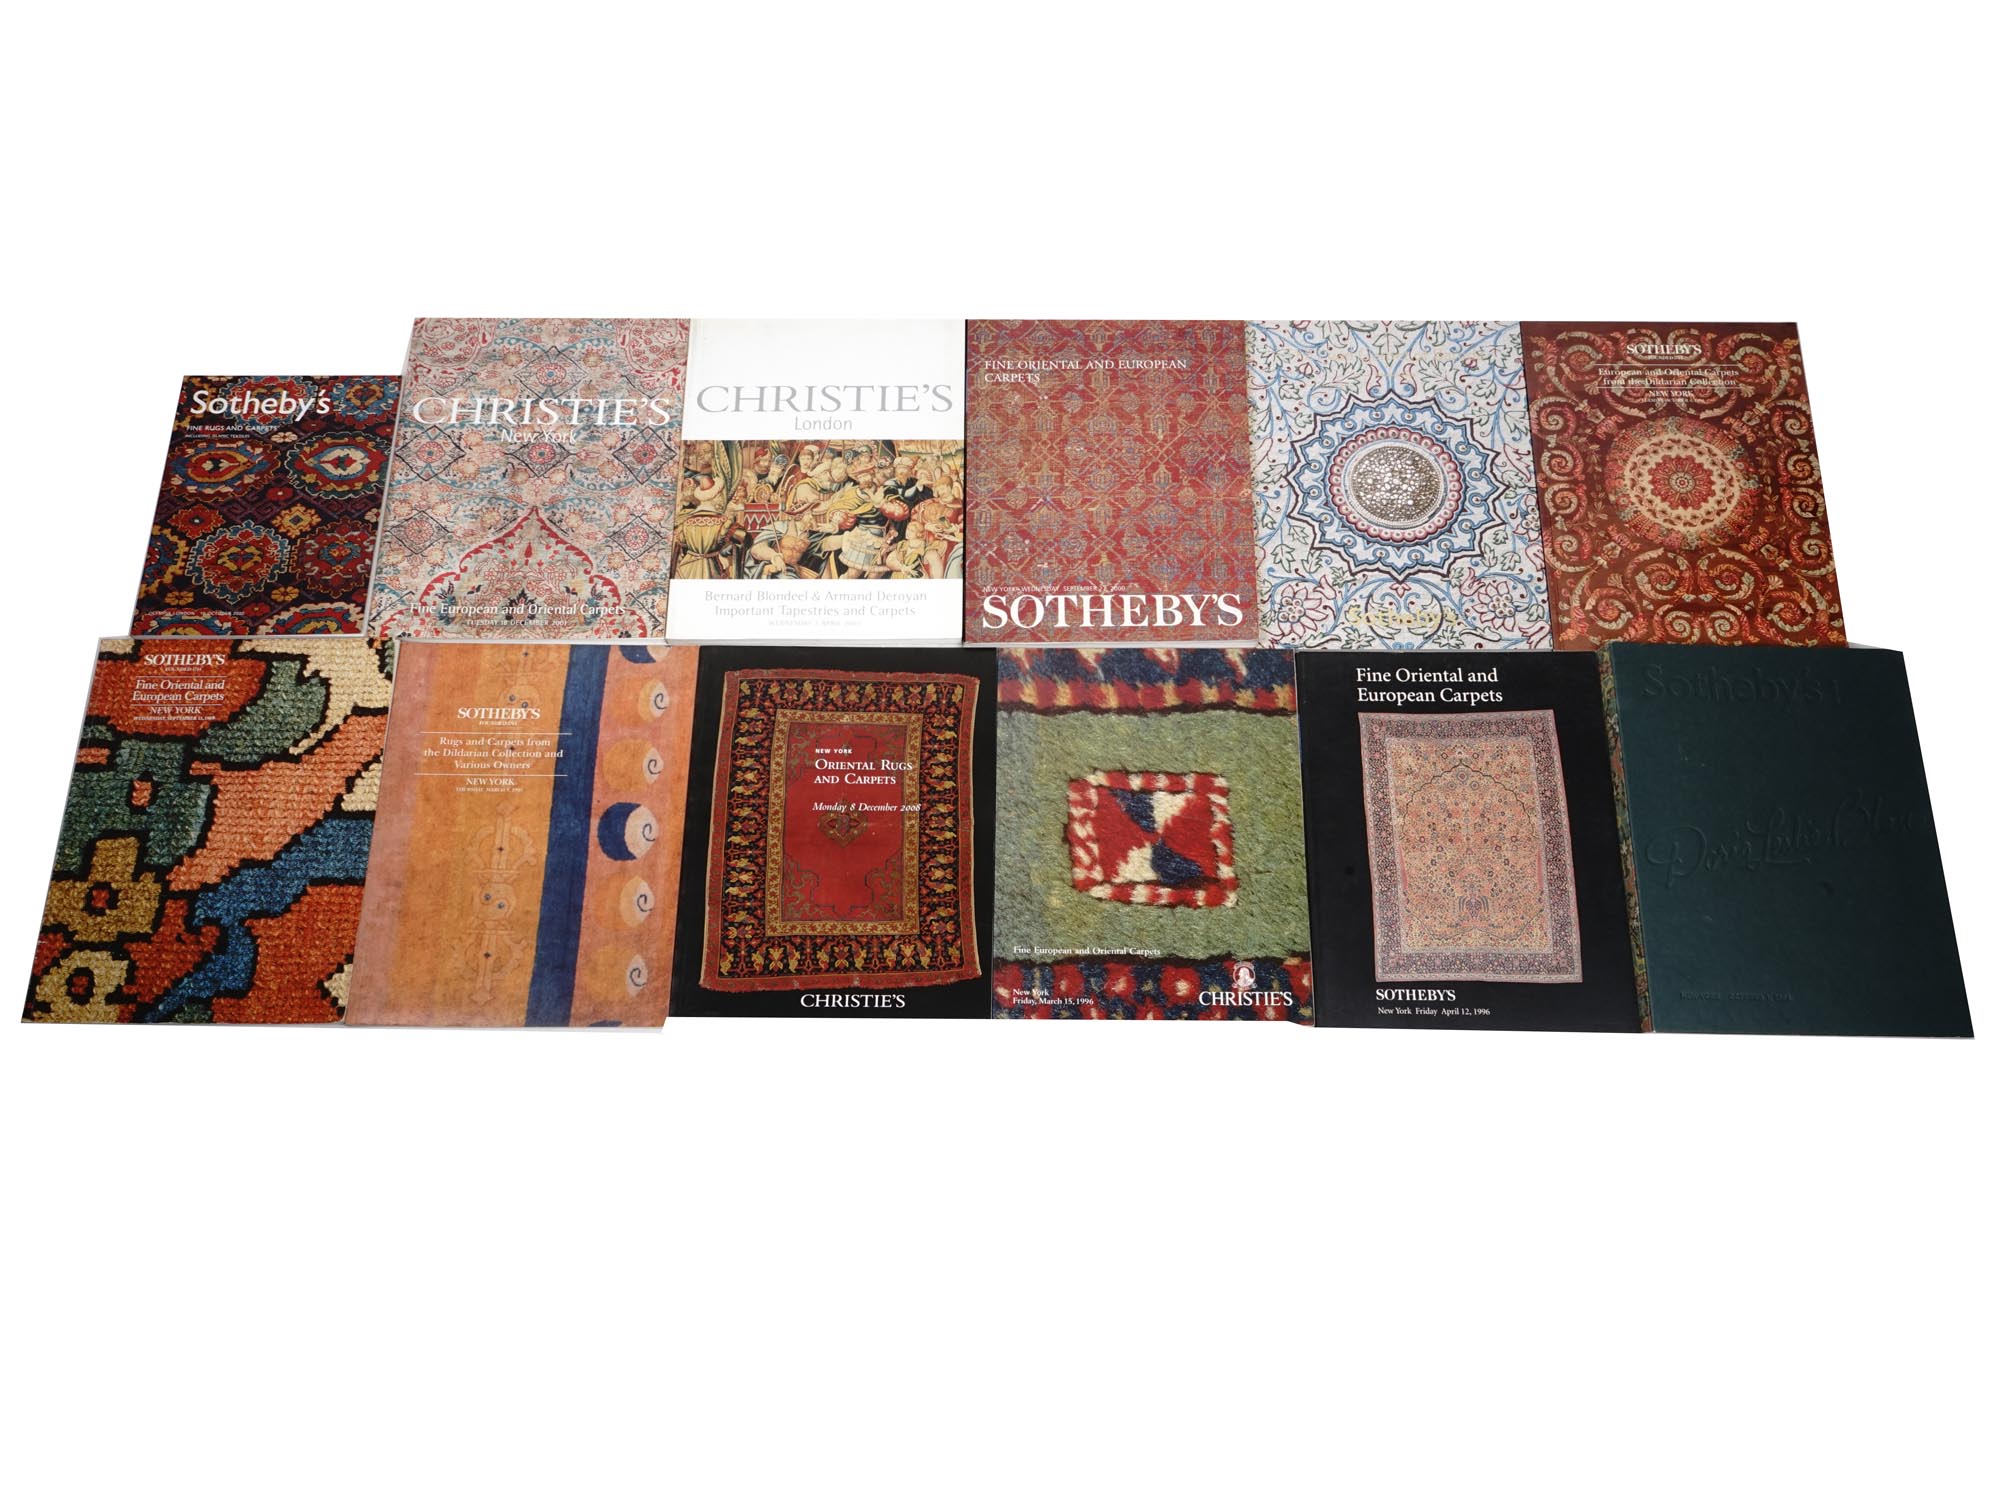 VINTAGE CHRISTIES SOTHEBYS RUG CATALOG COLLECTION PIC-1